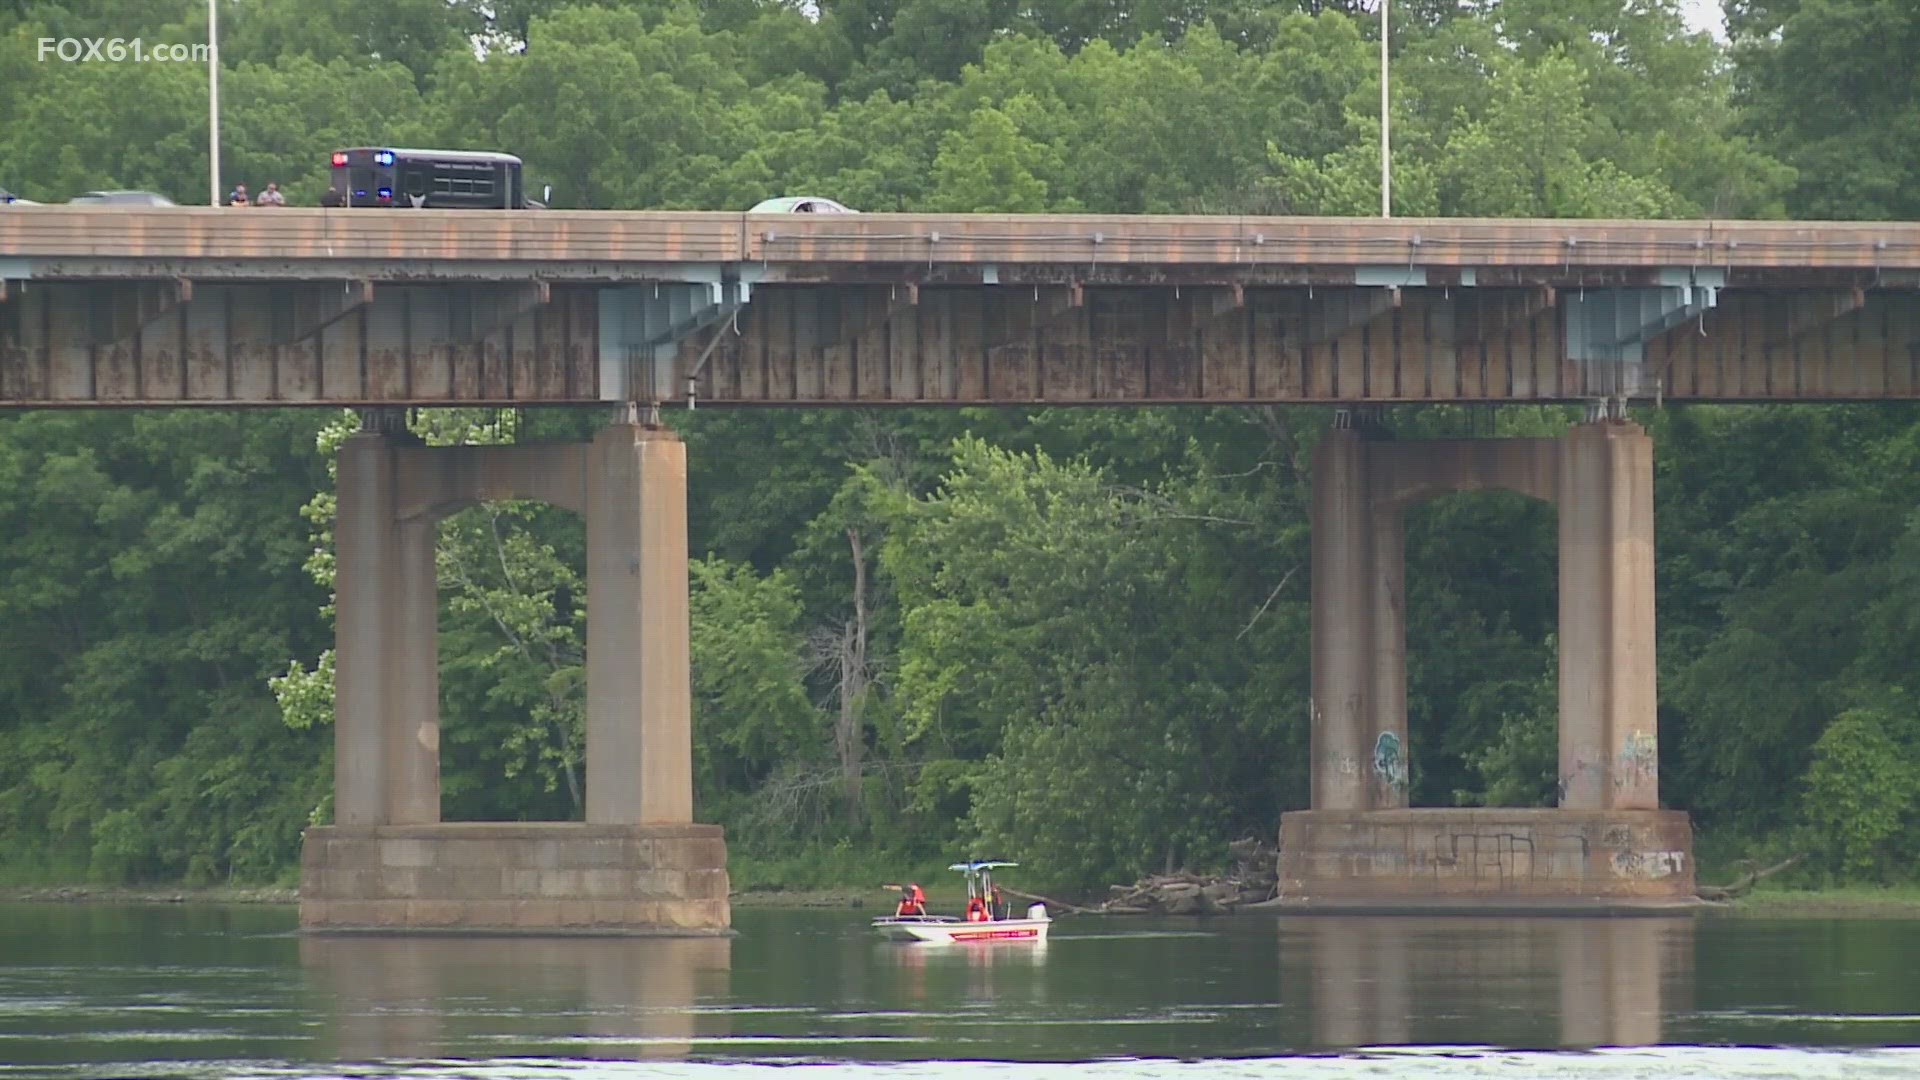 Enfield fire officials called off their search for a body in the river around noon Friday after reports of someone jumping into the Connecticut River late Thursday.